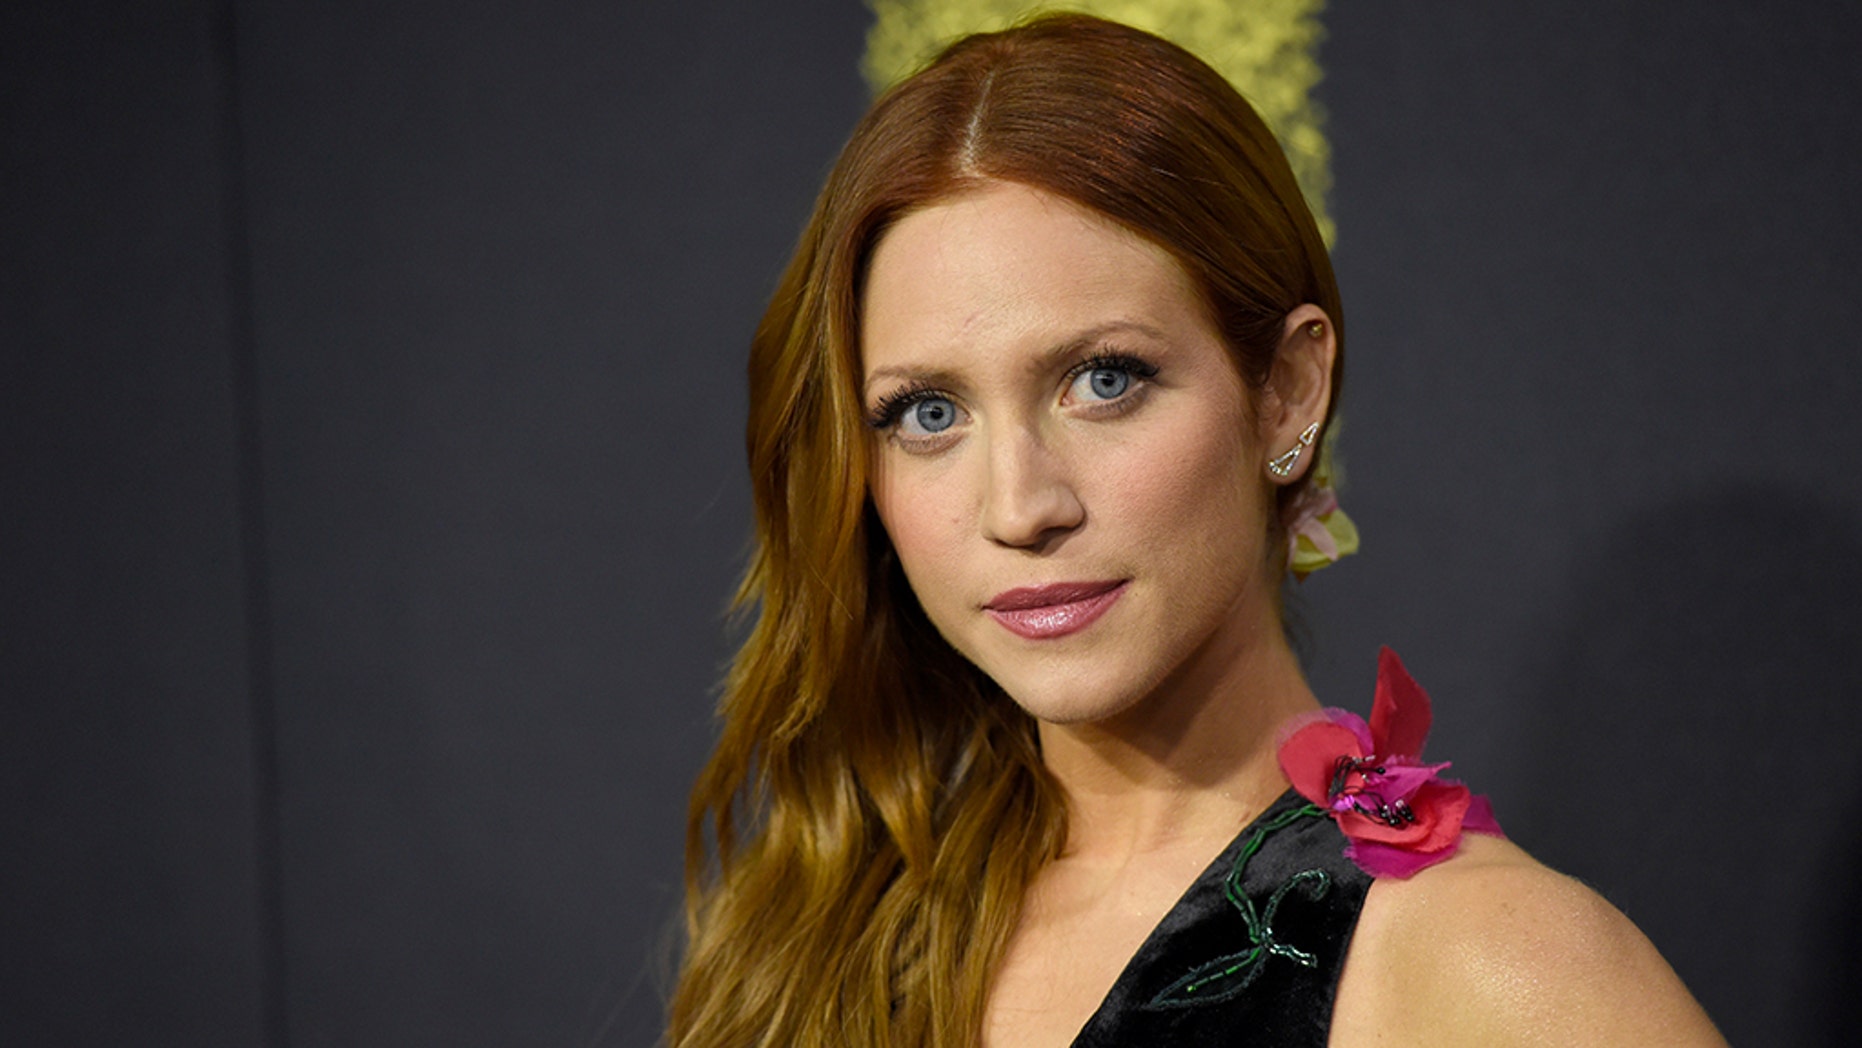 Brittany Snow Anna Kendrick Porn Captions - Brittany Snow marries Tyler Stanaland during romantic Malibu ceremony |  Lipstick Alley